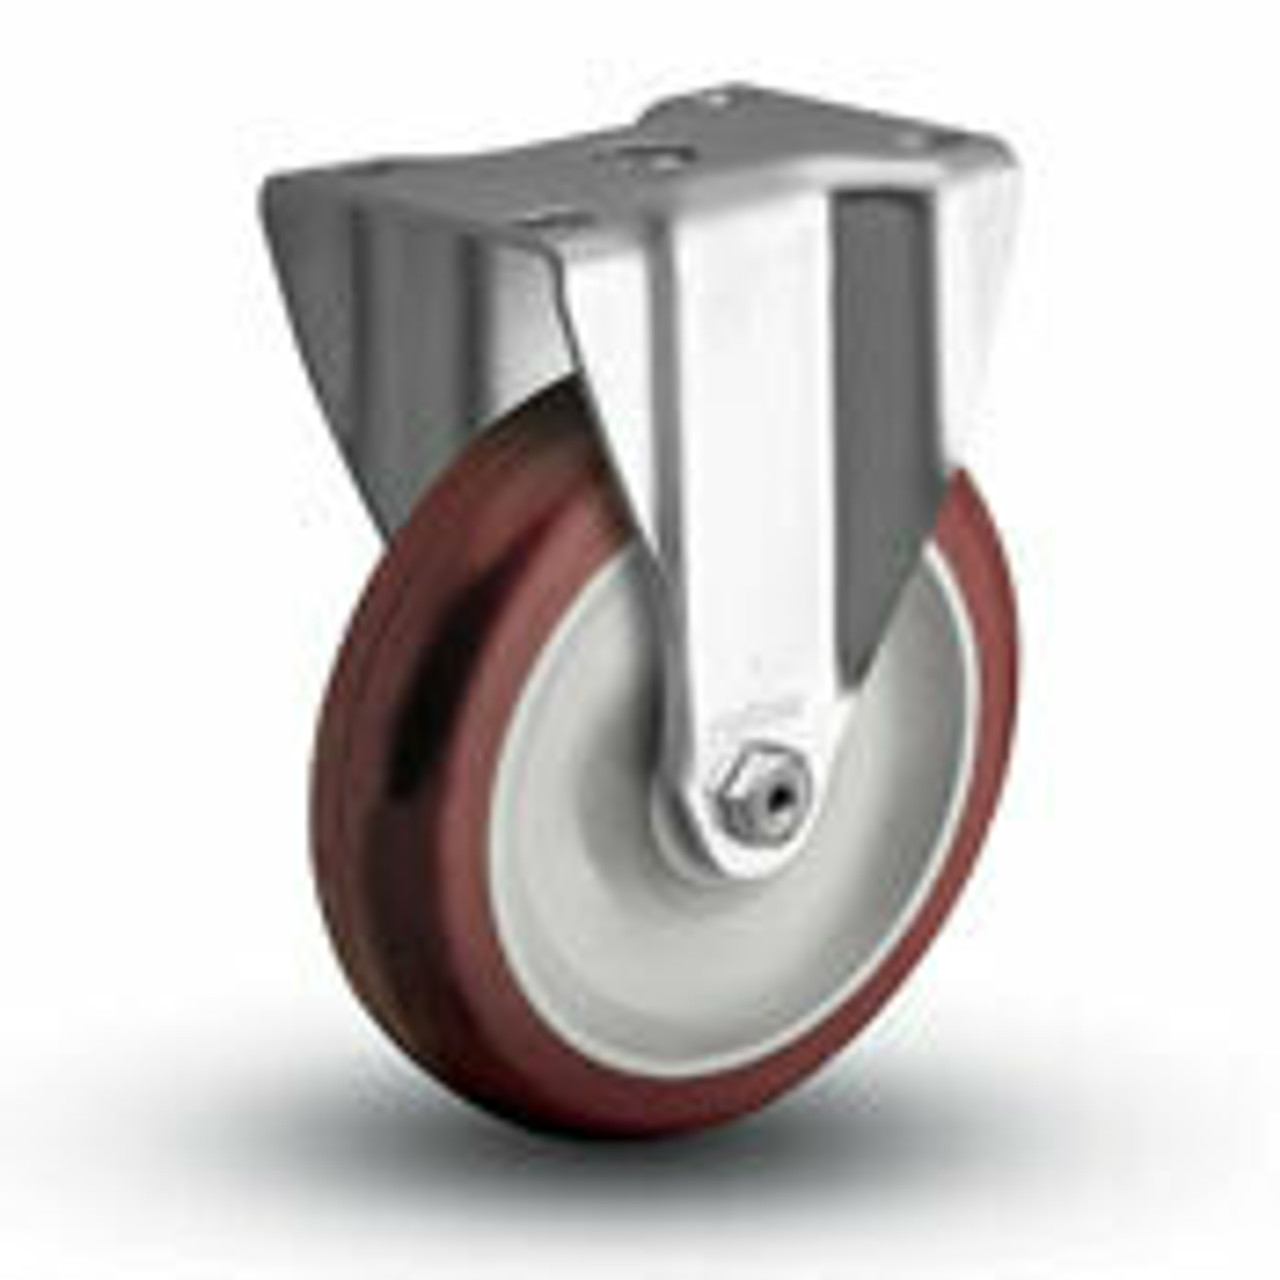 This rigid 2.5" caster has a red poly HI-TECH wheel and has a load capacity of 250 lbs.